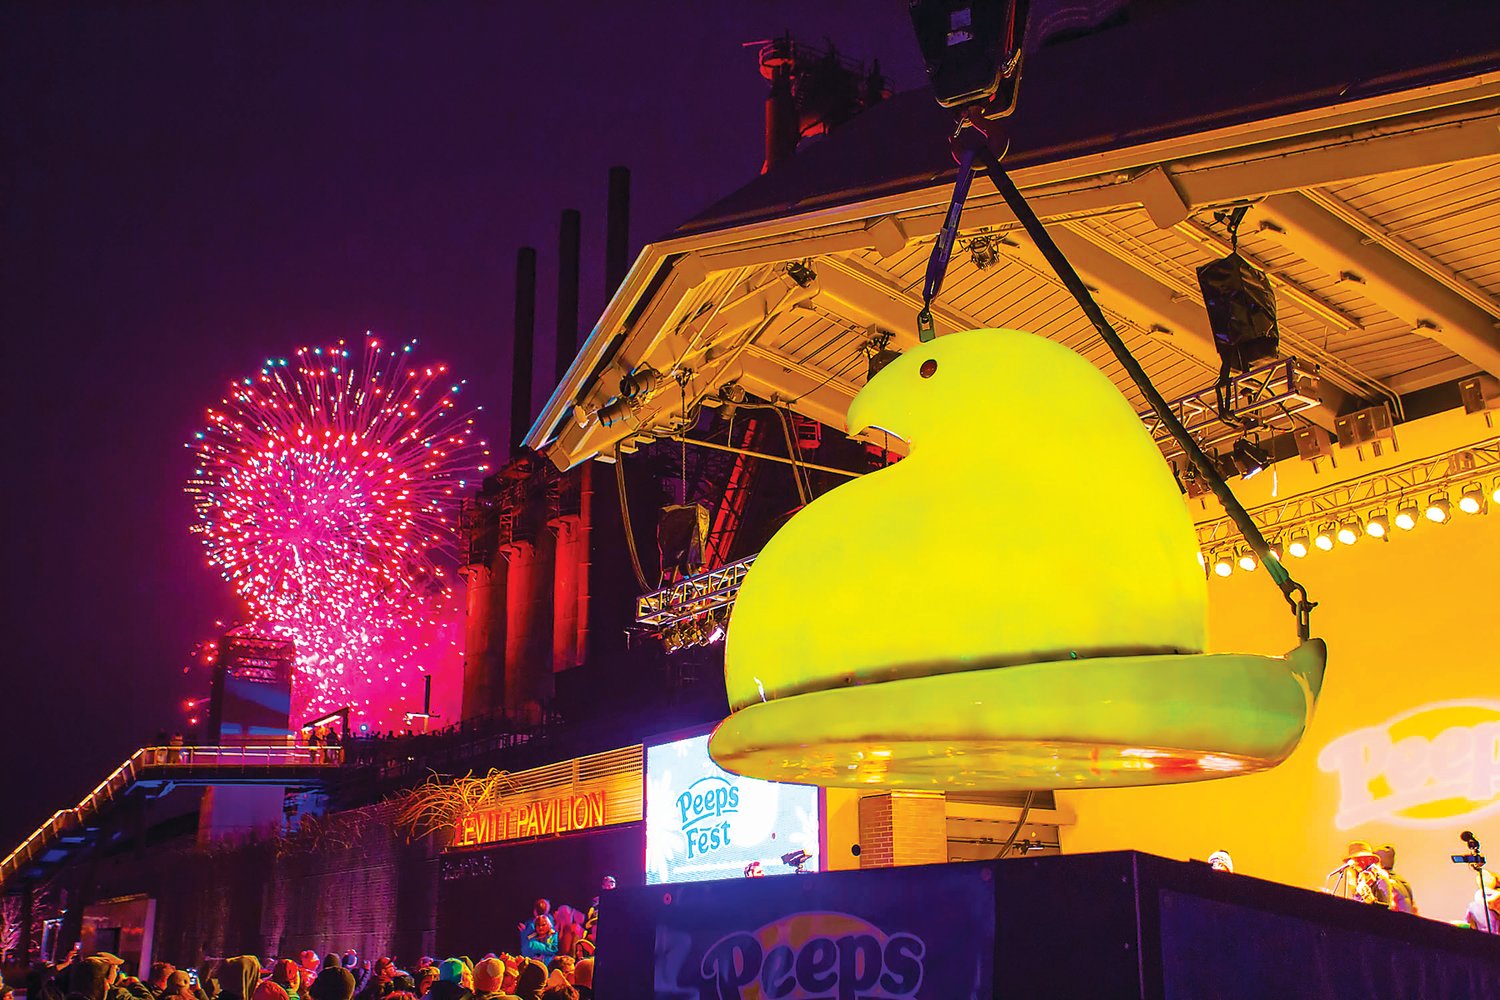 Peepsfest rings in the new year with a Peeps chick drop and fireworks.